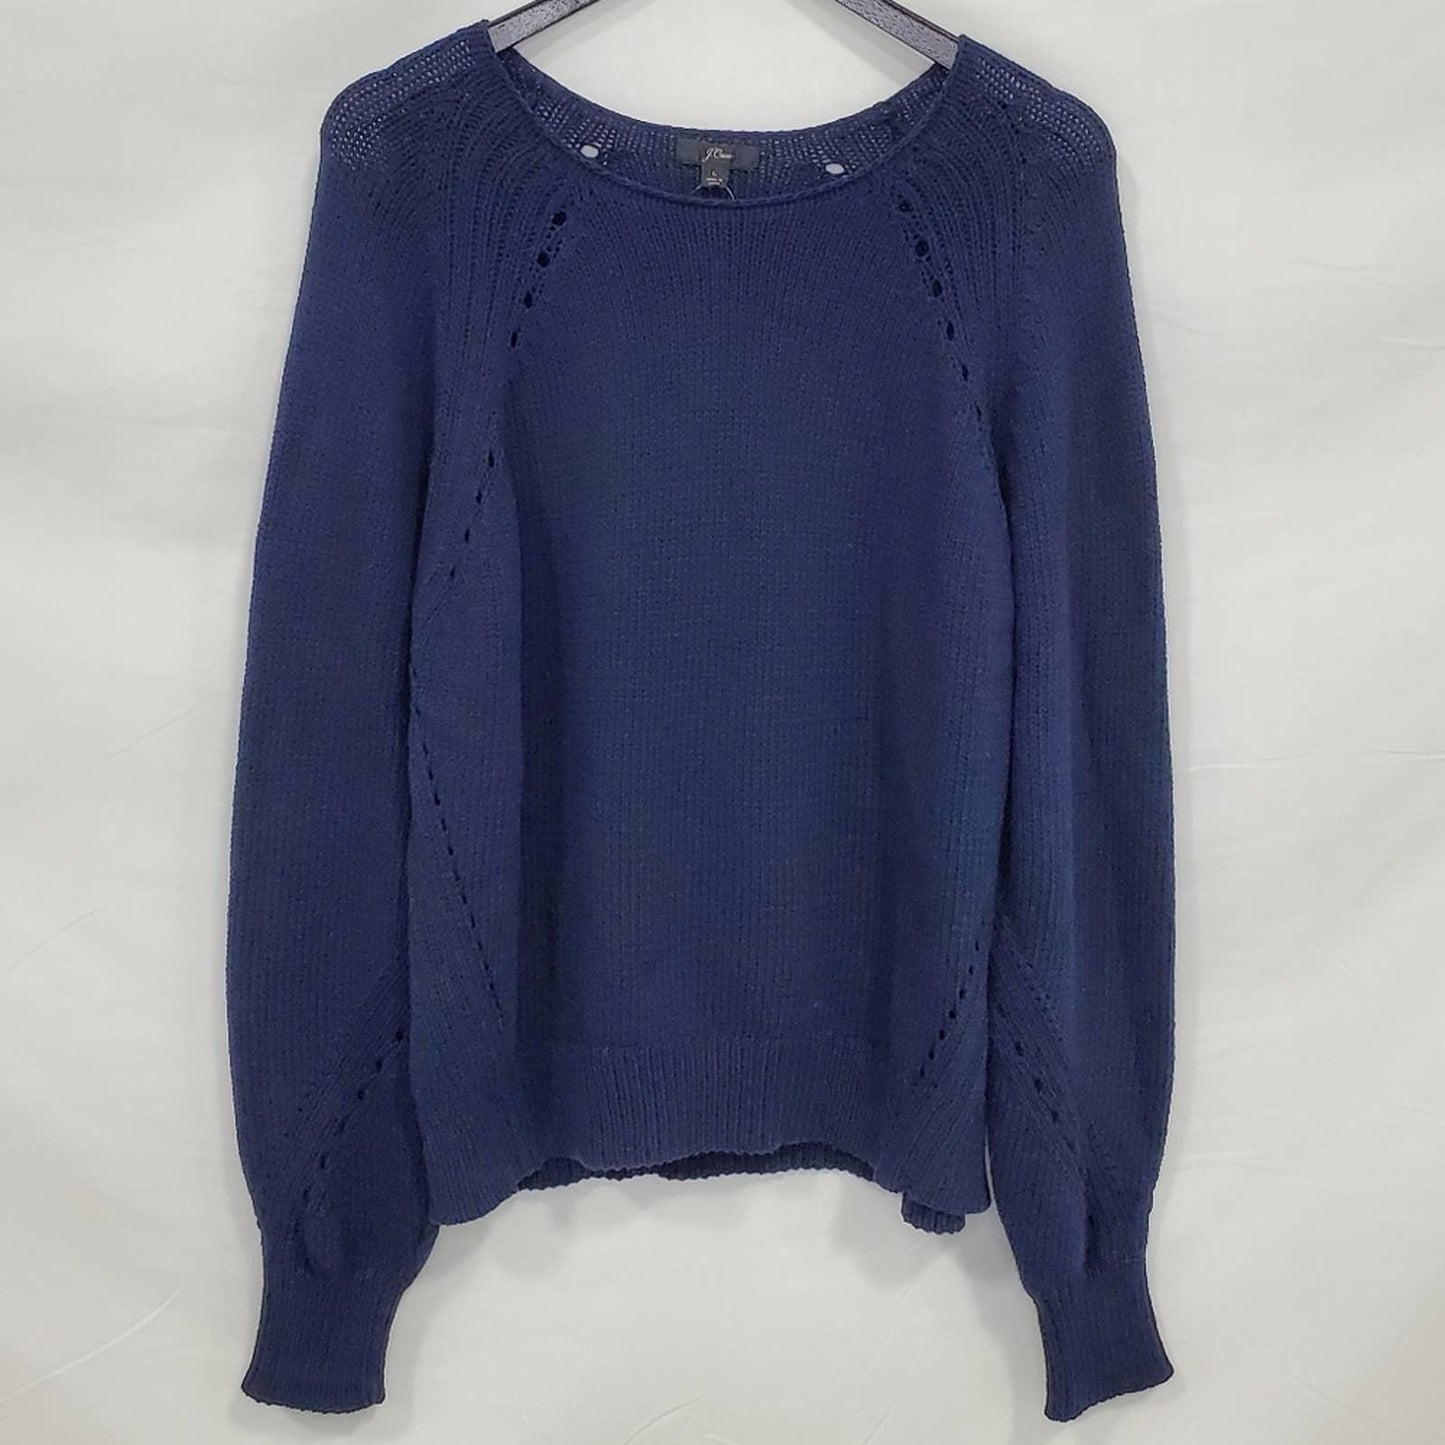 J. Crew Scoop Neck Cable Knit Women's Sweater